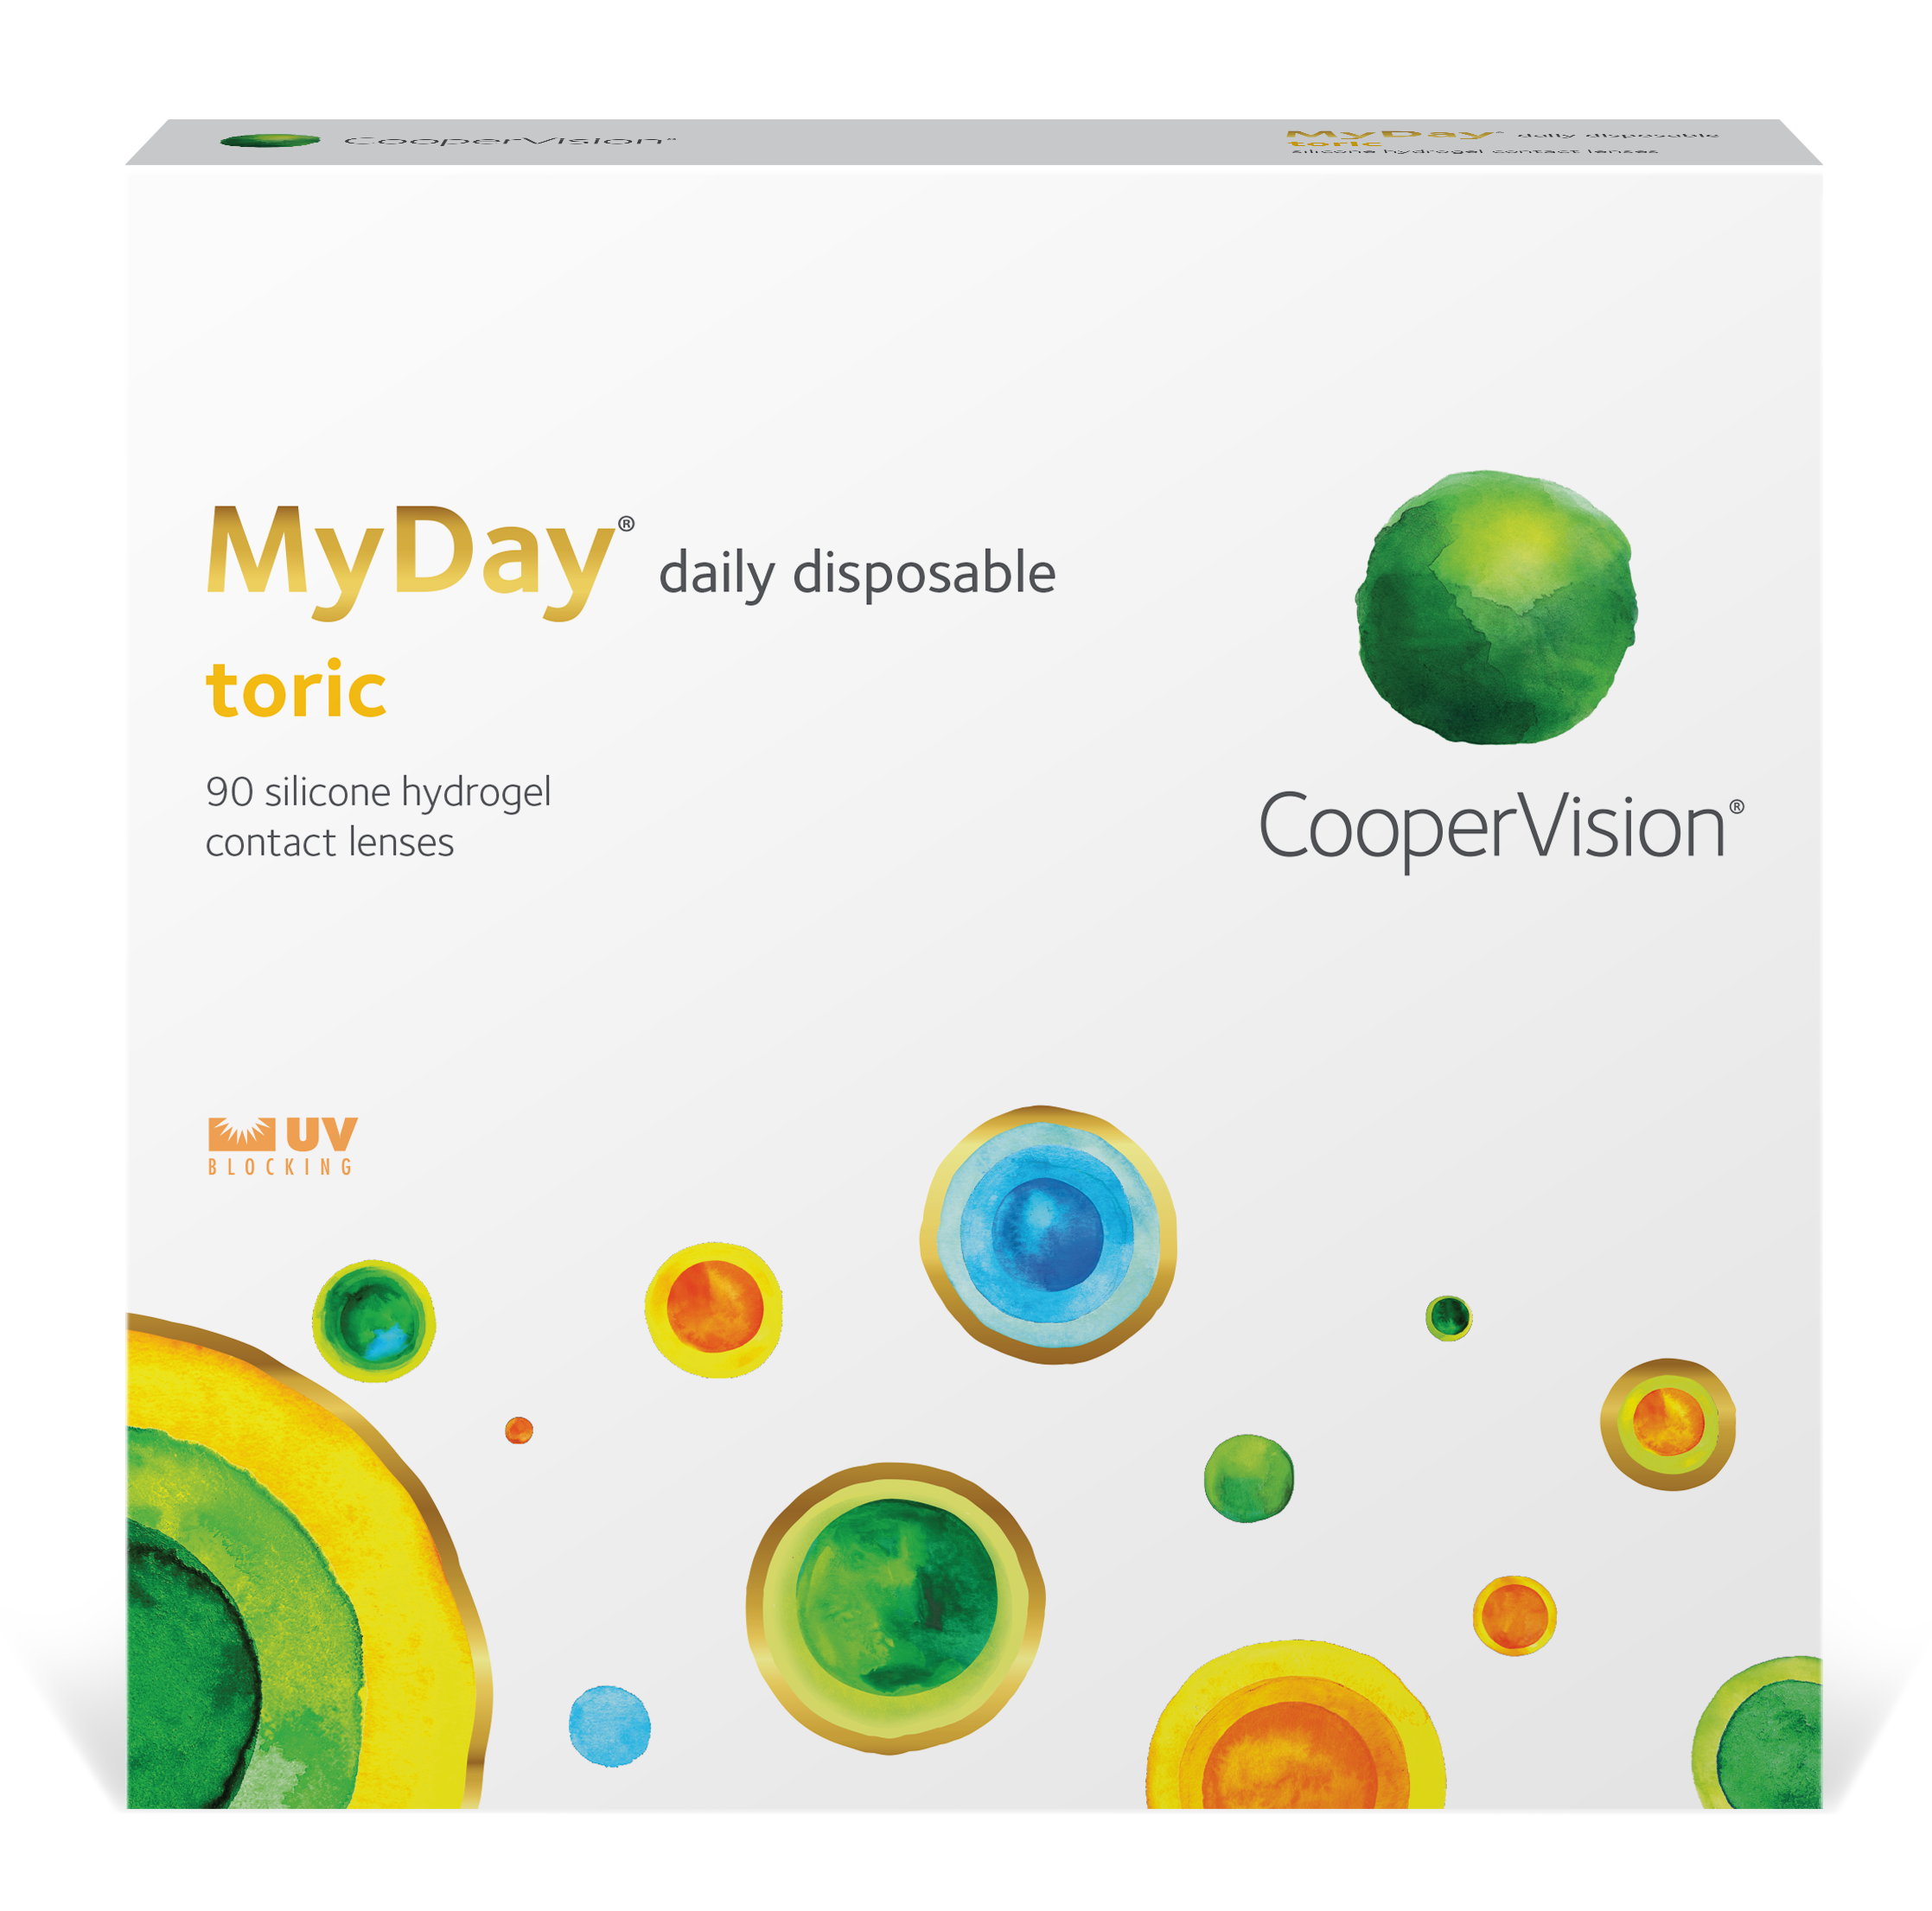 https://covalentcareers3.s3.amazonaws.com/media/original_images/Coopervision-myday-daily-disposable-toric-contact-lenses_SQW0bSE.png